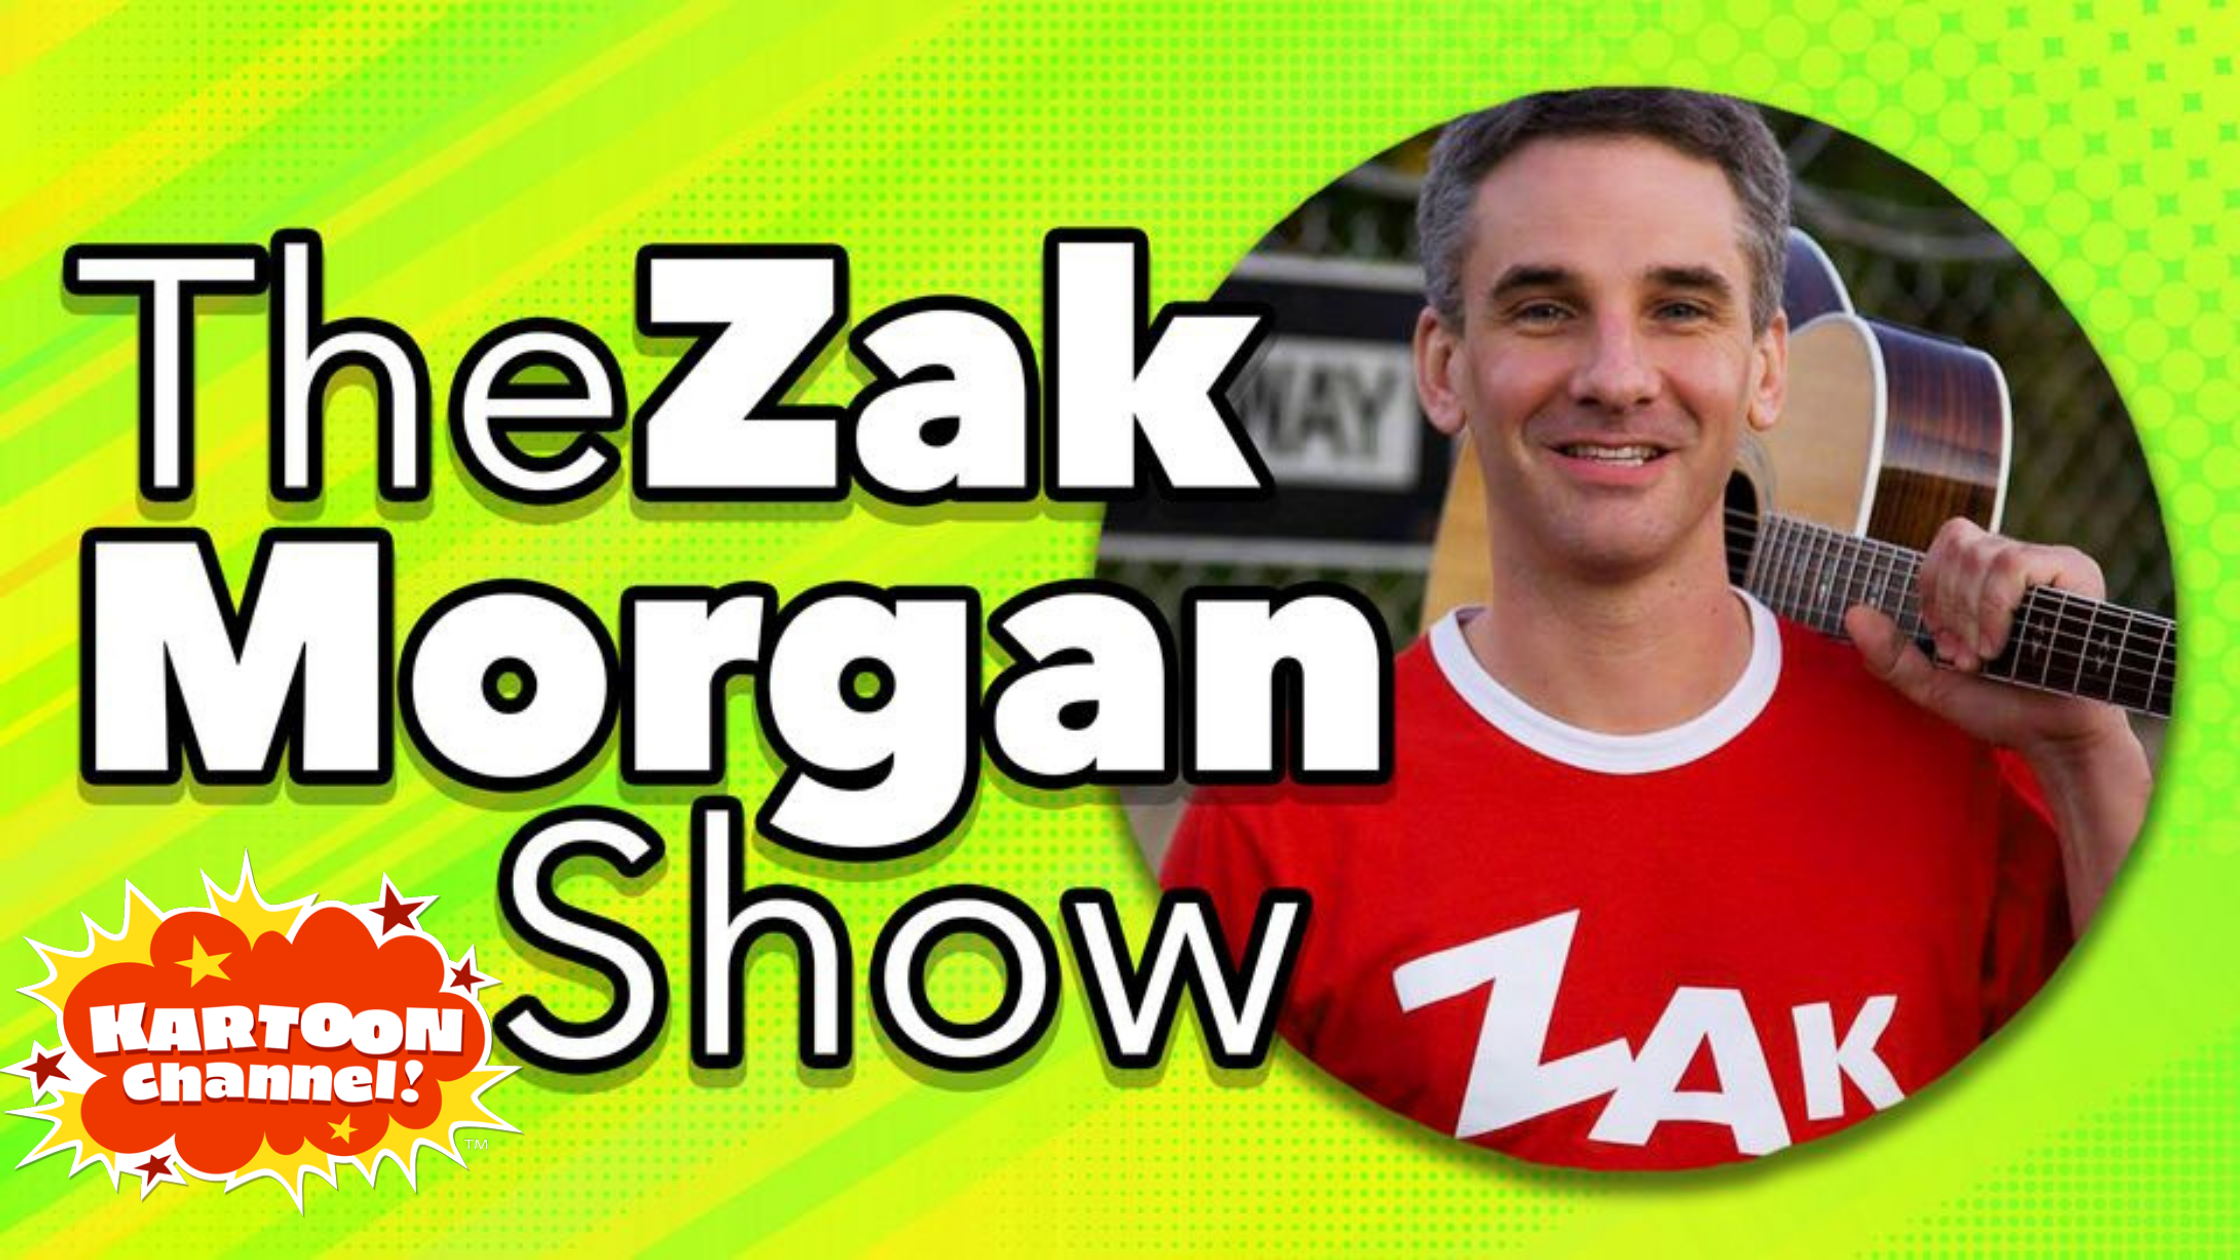 Check out The Zak Morgan Show on Kartoon Channel